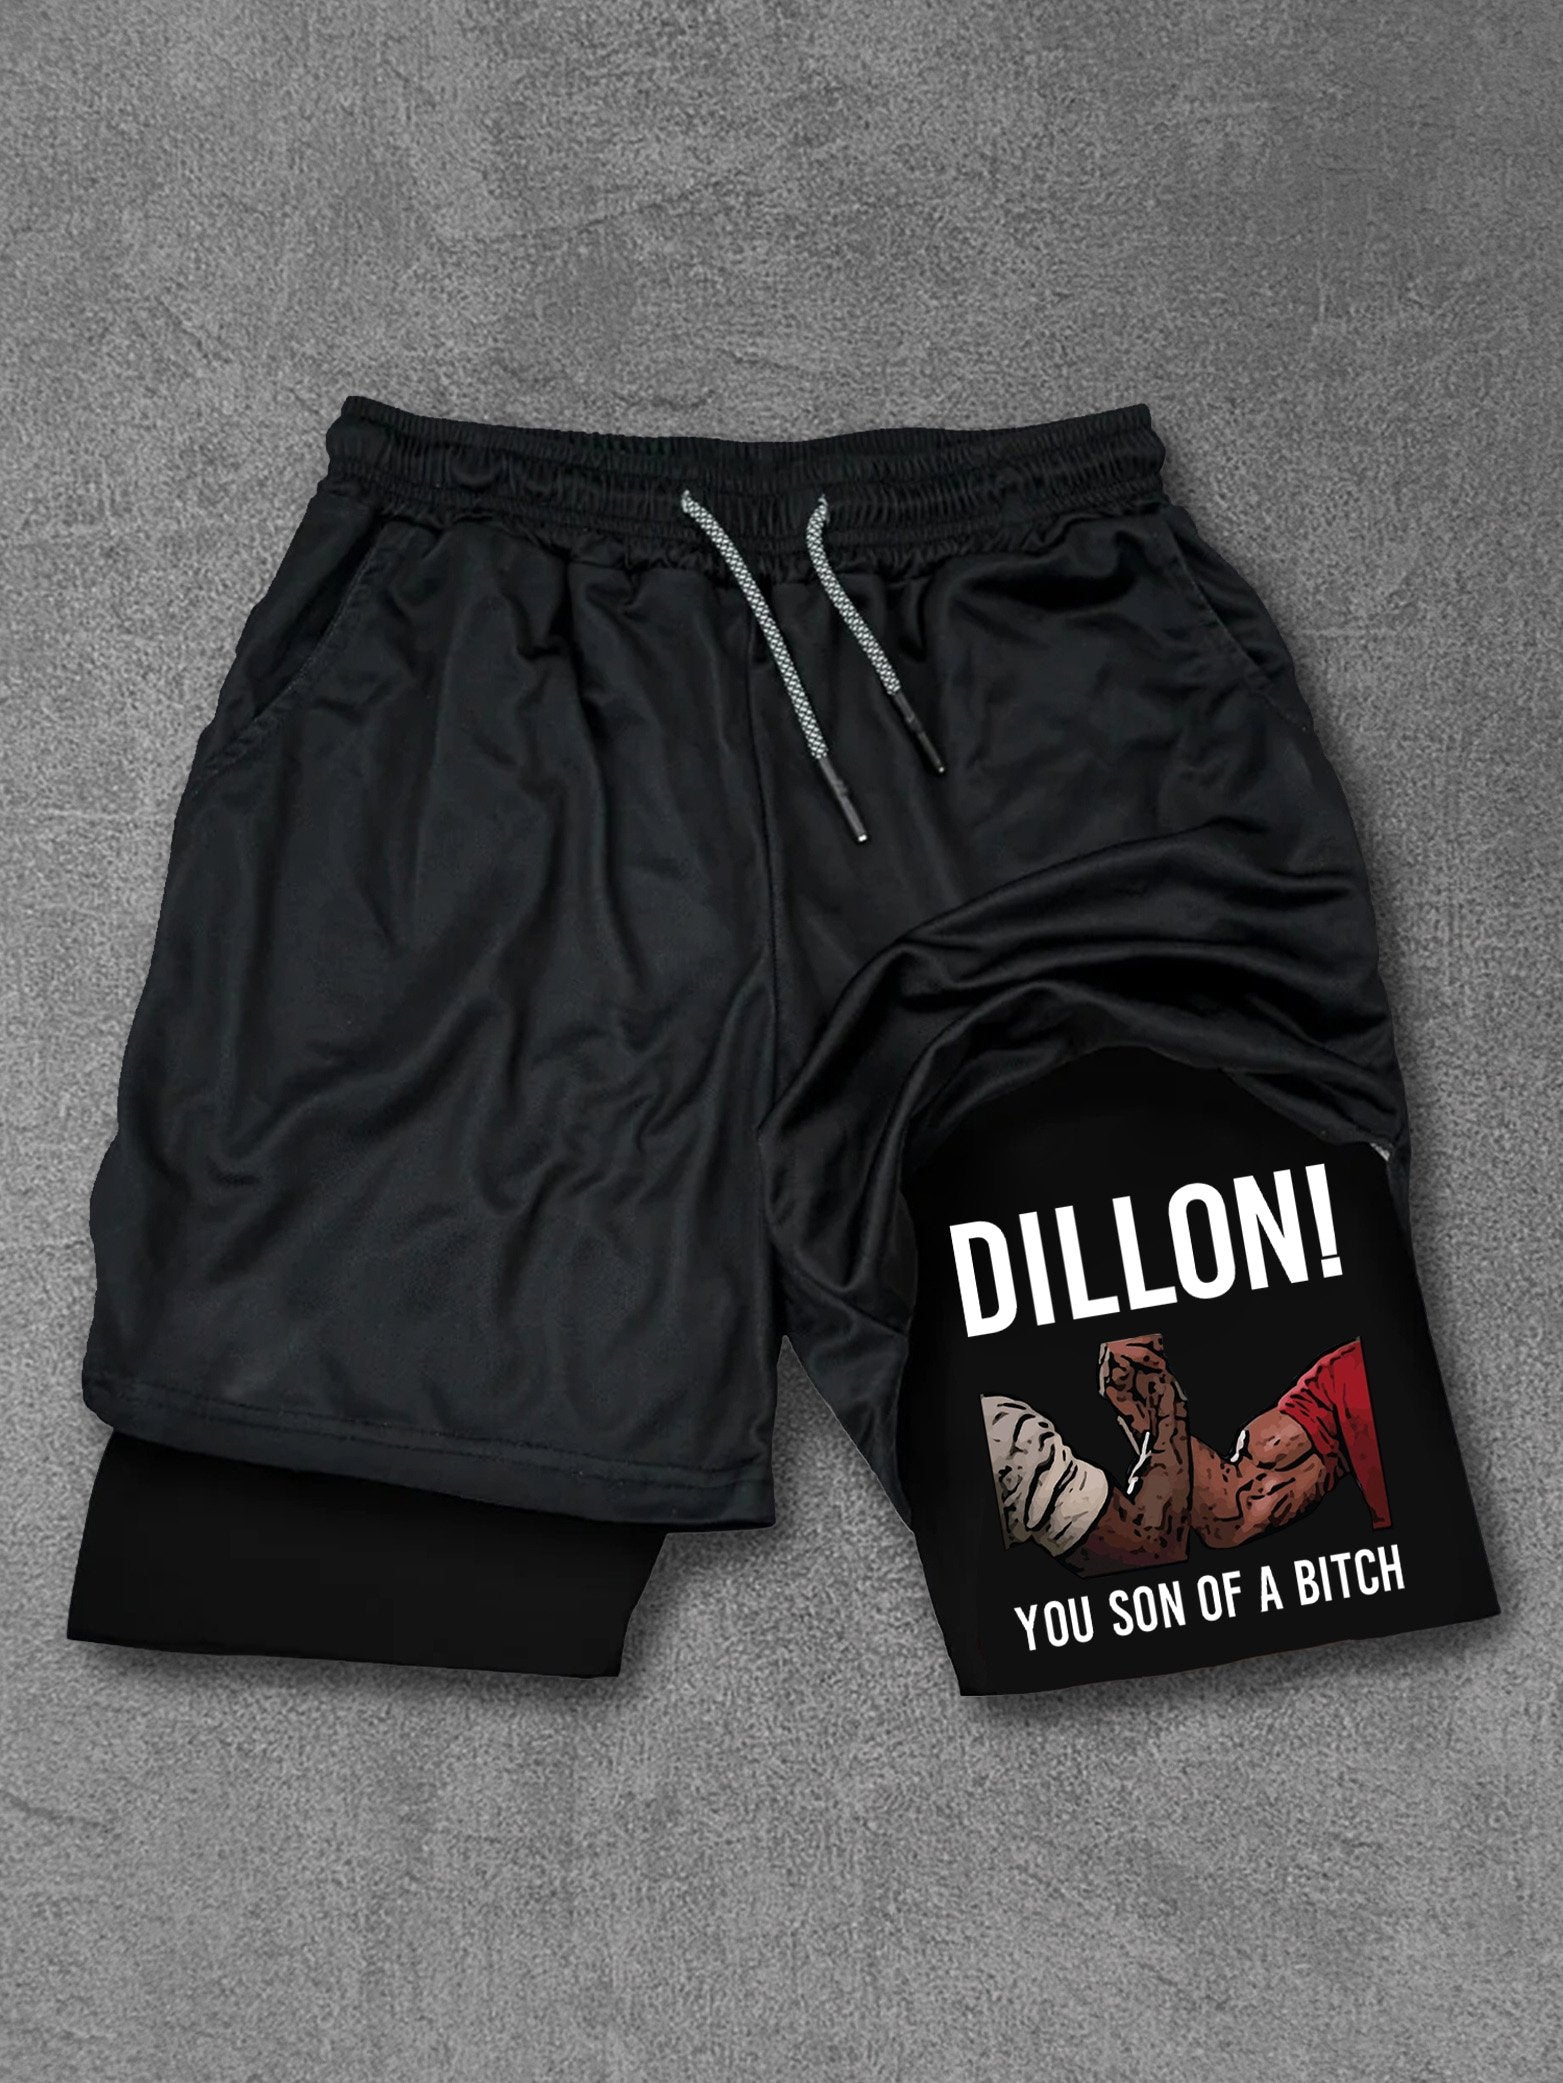 Dillon You Son OF A B*tch Performance Training Shorts